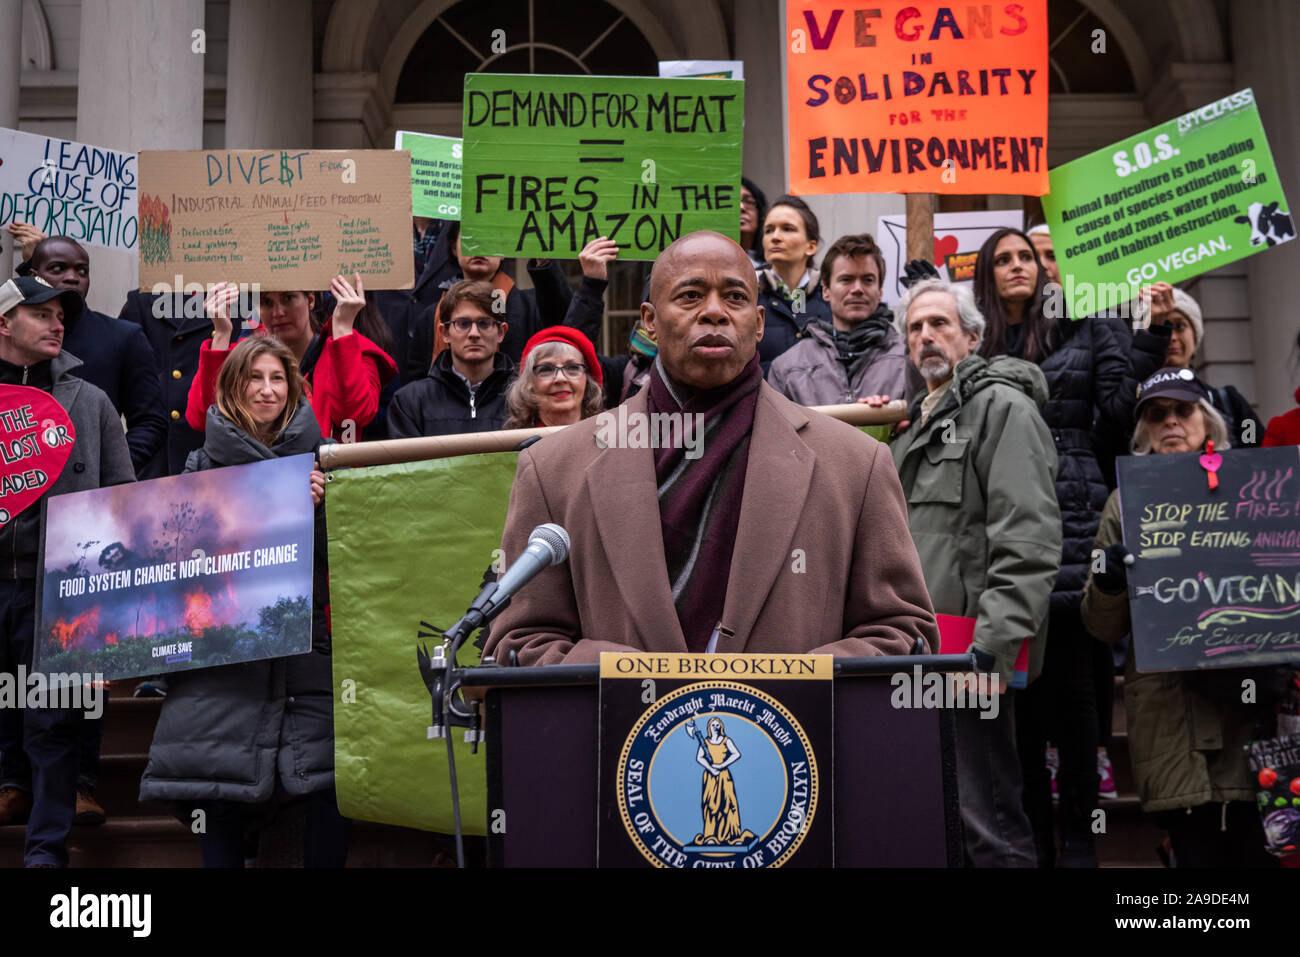 New York, USA. 14th Nov, 2019. Brooklyn Borough President Eric Adams takes questions after the announcement of a resolution calling for ban on business with companies tied to the Amazon Wildfires on the steps of New York City Hall on November 14, 2019. An annual 5% increased demand for beef has prompted South American ranchers to burn swaths of the historic rainforest, an asset in the fight against climate change, which have gone out of control. (Photo by Gabriele Holtermann-Gorden/Pacific Press) Credit: Pacific Press Agency/Alamy Live News Stock Photo